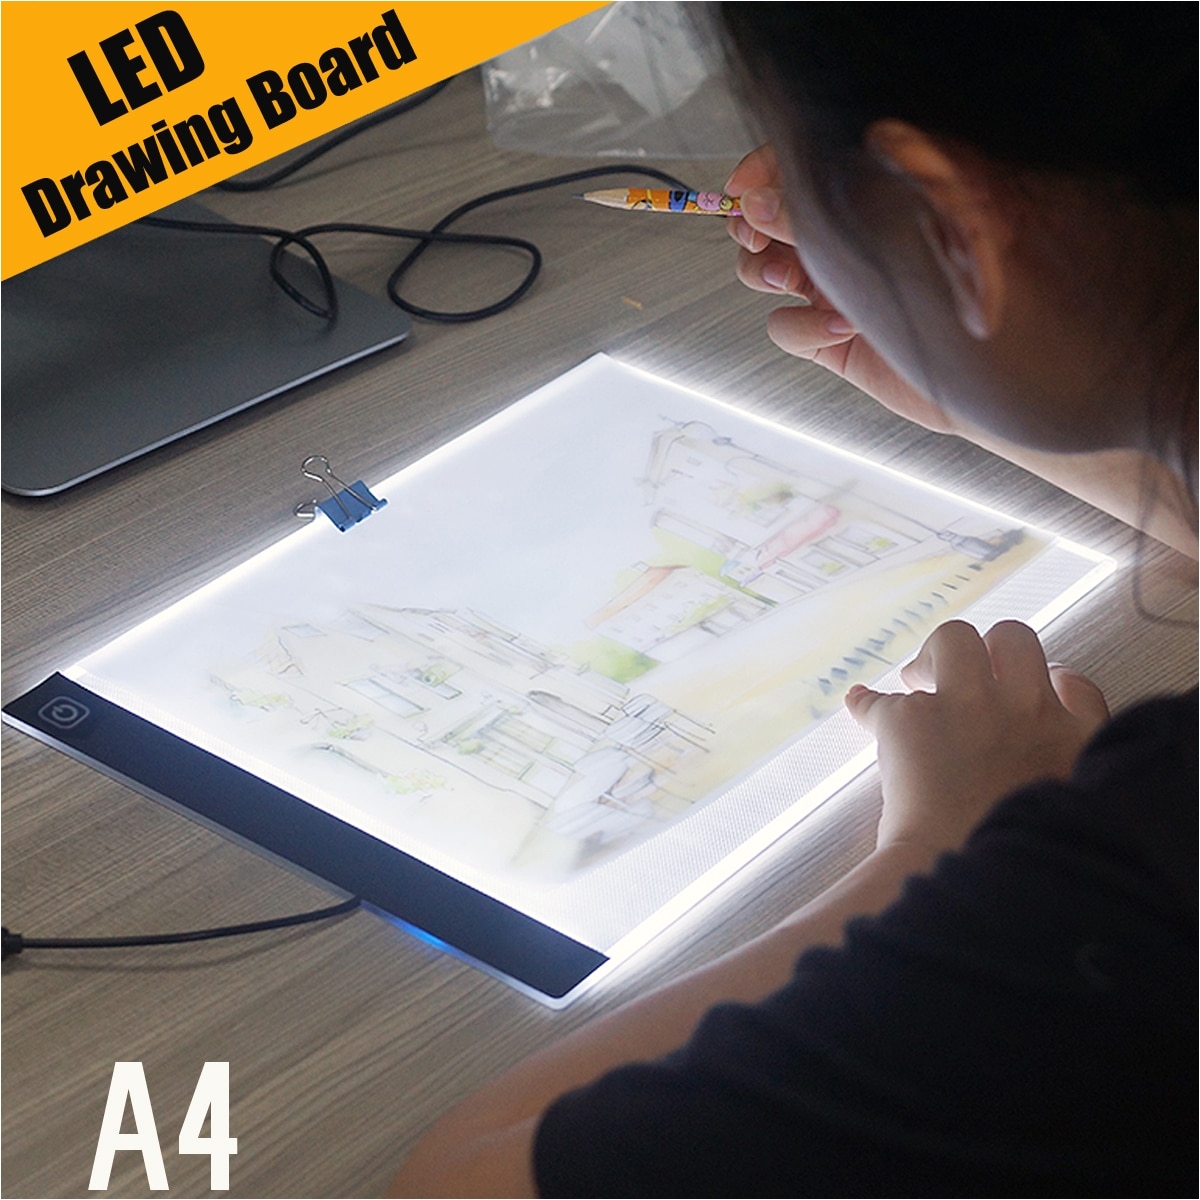 leory a4 led drawing tablet led graphic tablet writing painting light box art stencil art board